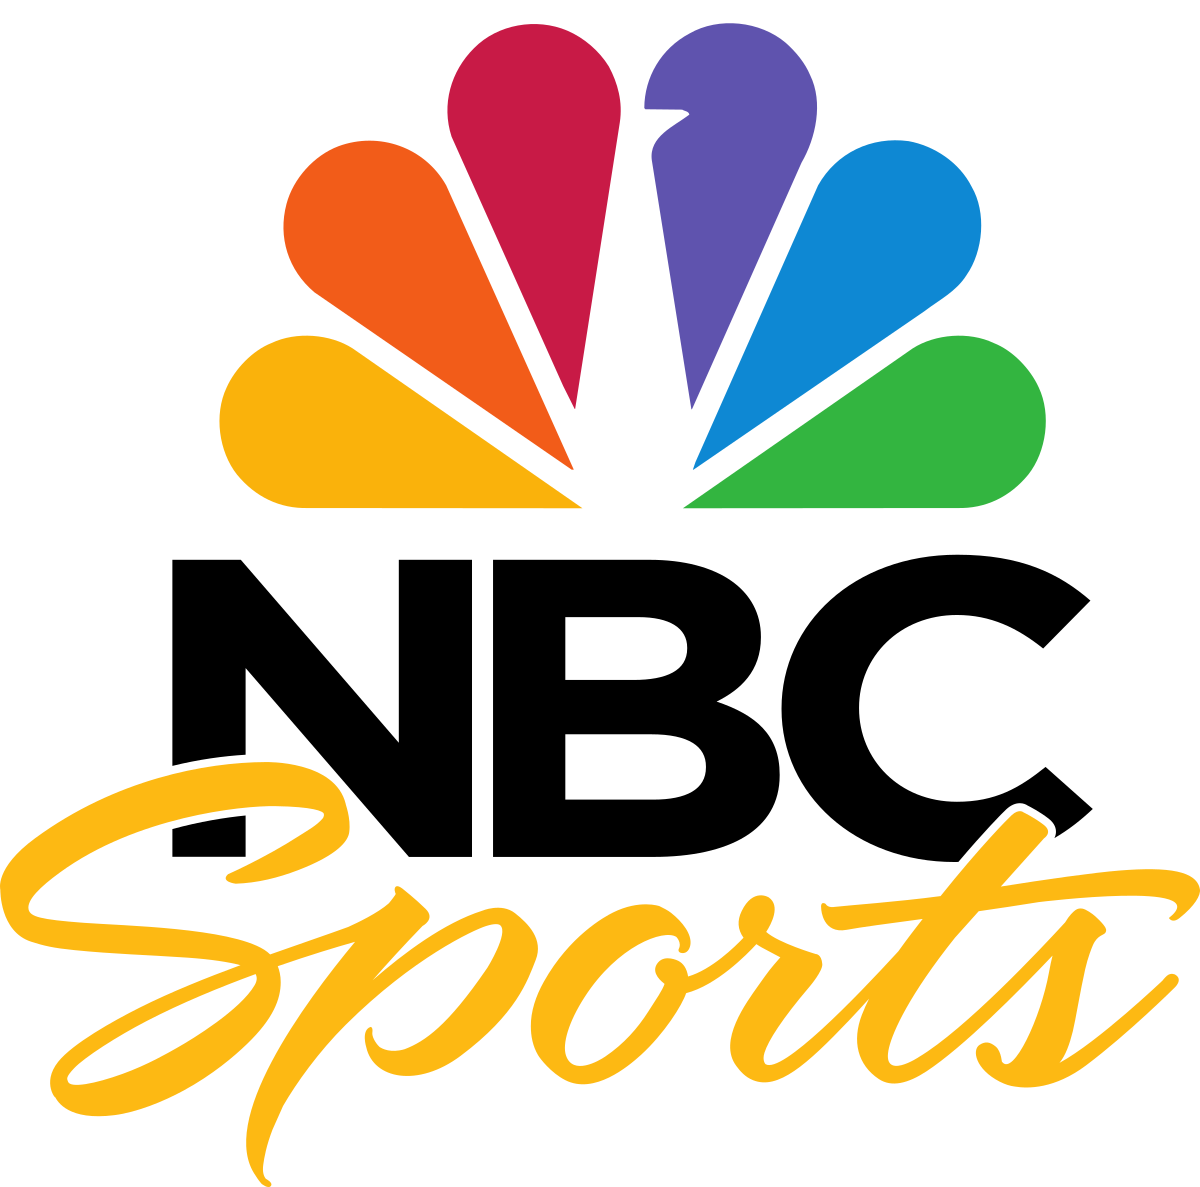 Stamfords NBC Sports in NFL season pact with BetMGM